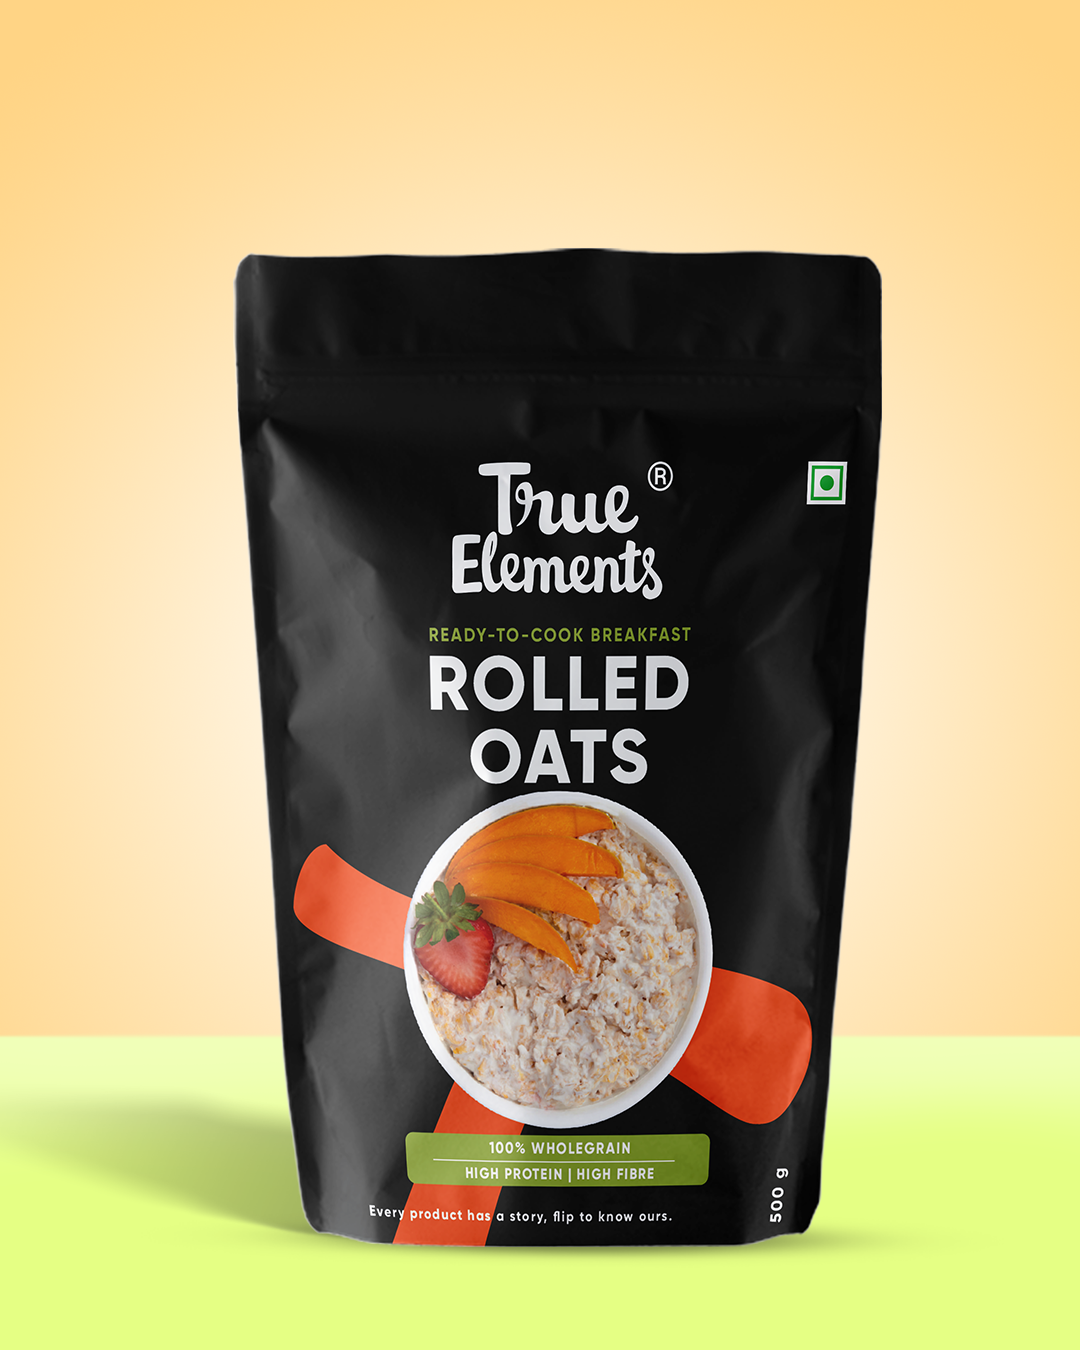 Buy Rolled Oats Online - Starting From Rs.199